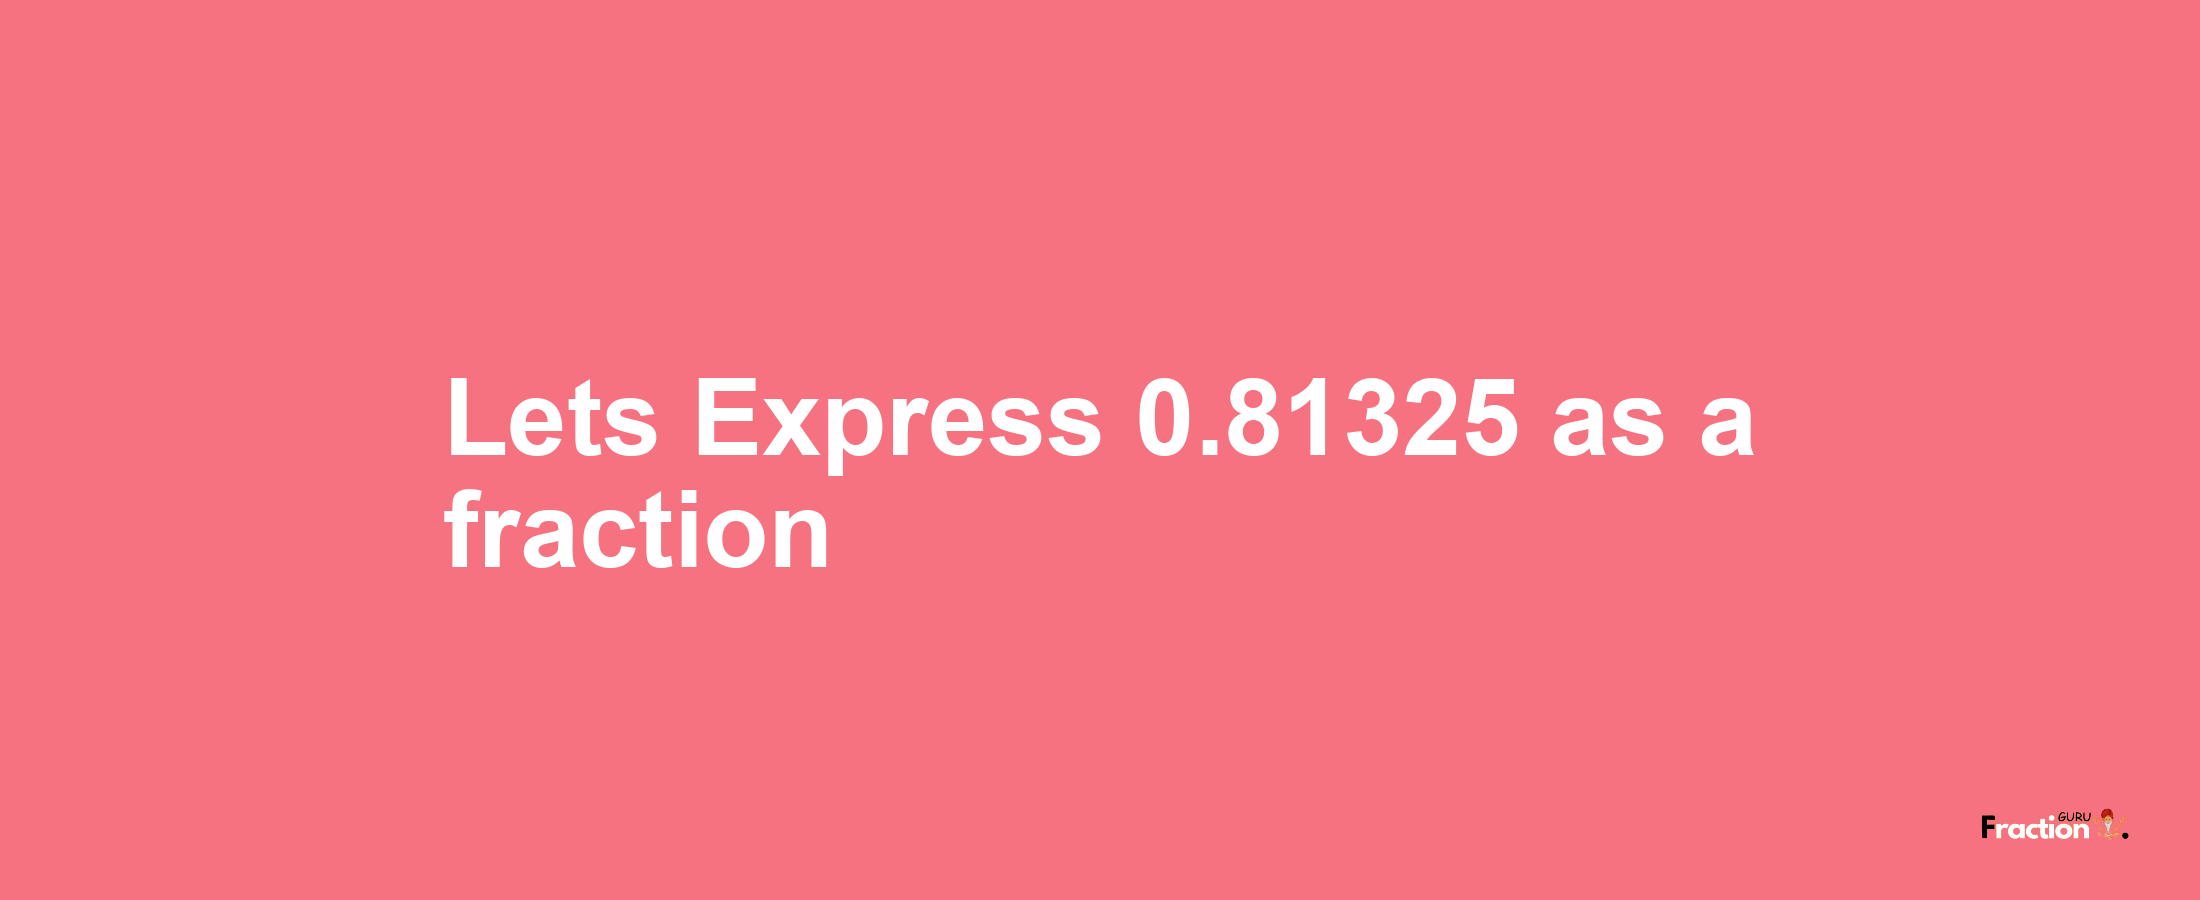 Lets Express 0.81325 as afraction